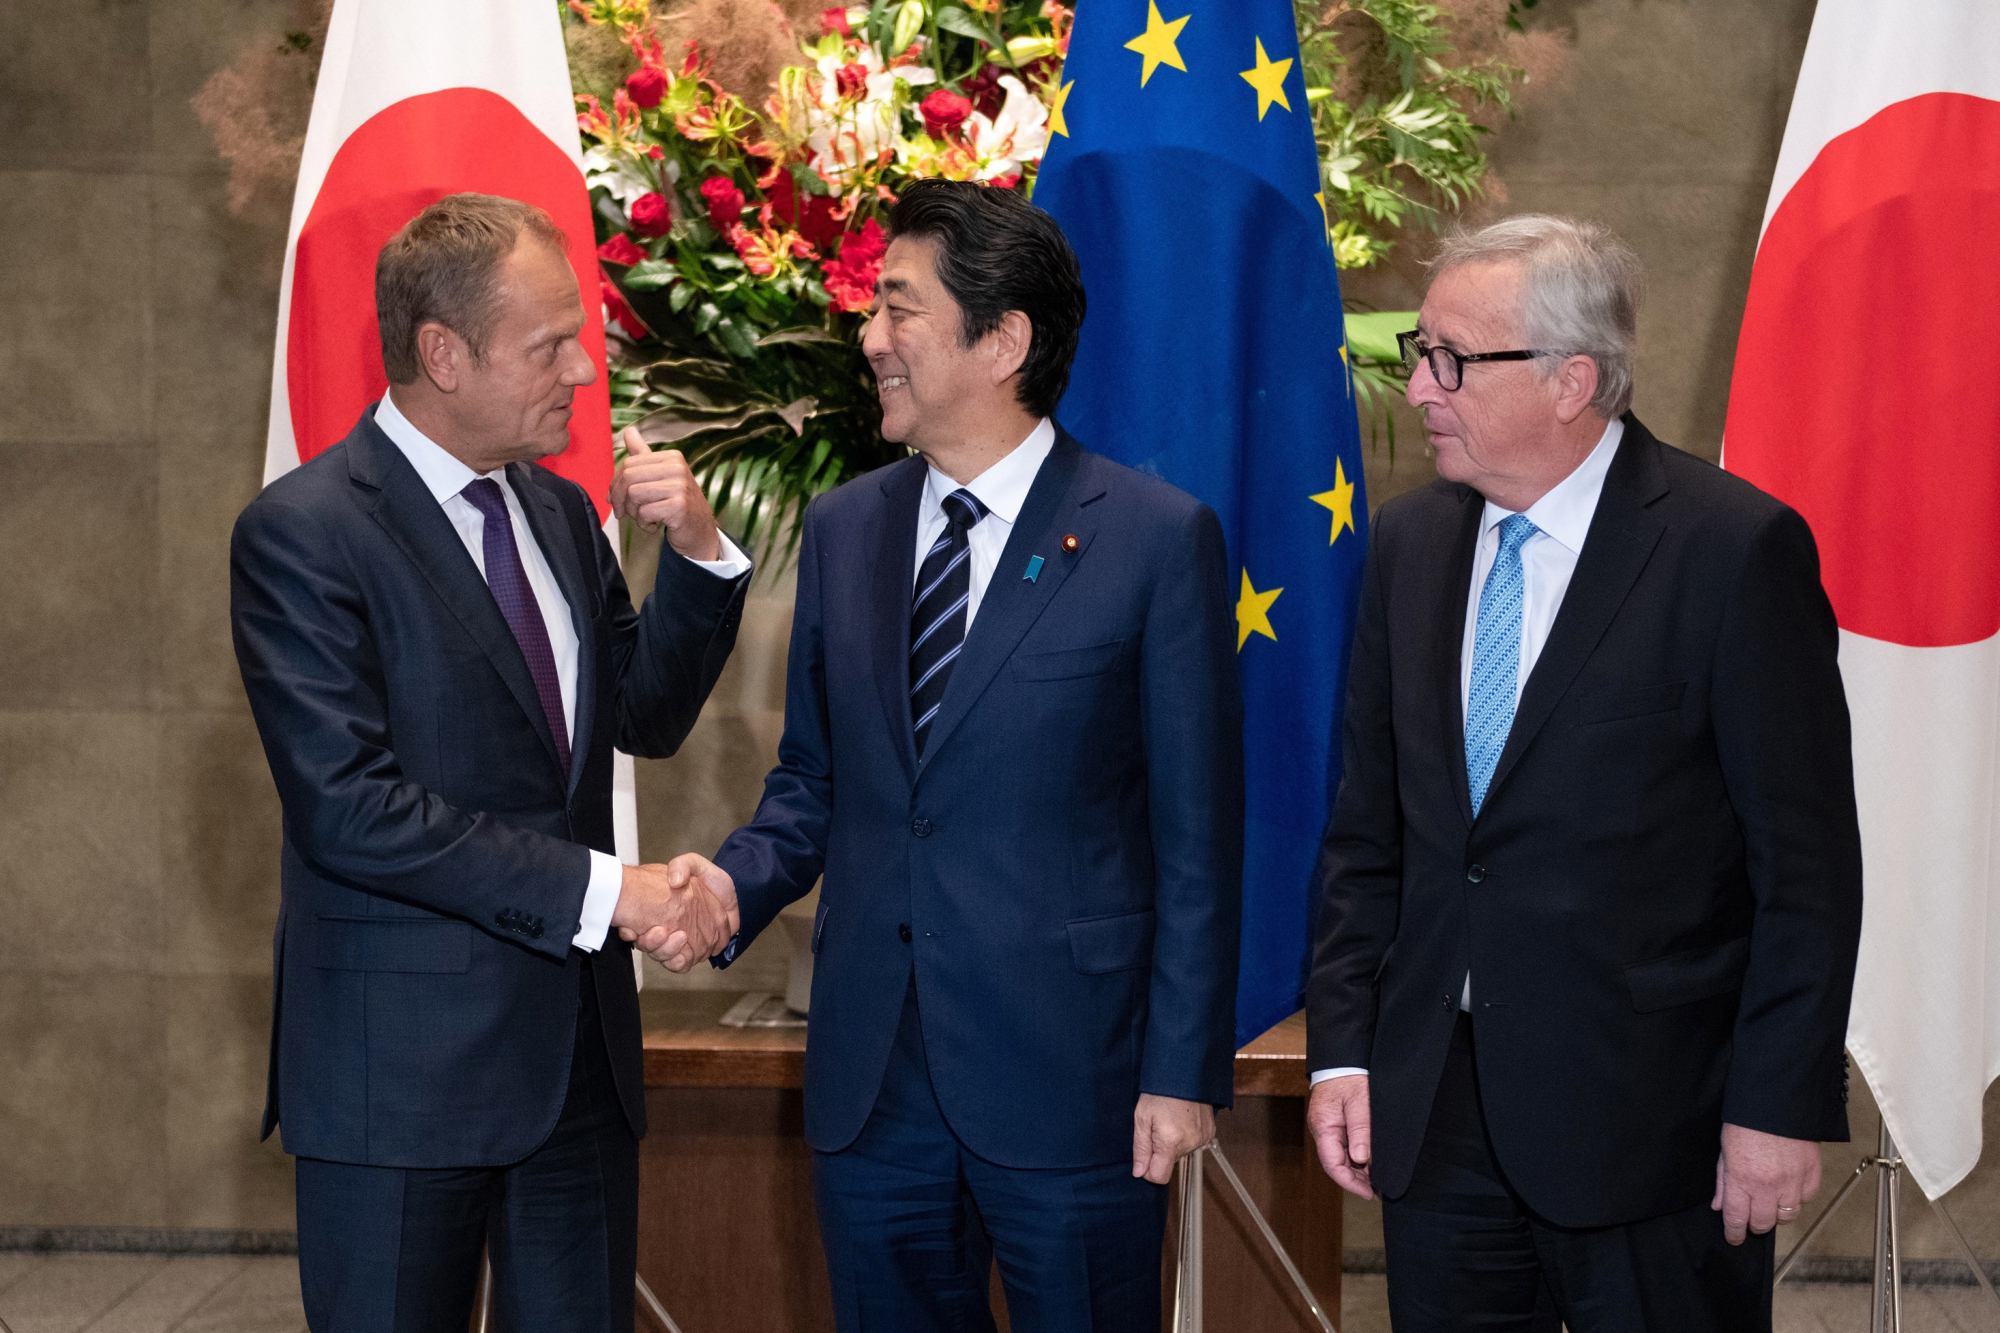 Prime Minister Shinzo Abe shakes hands with European Council President Donald Tusk as European Commission President Jean-Claude Juncker looks on before signing a free trade pact in Tokyo on Tuesday. | AP